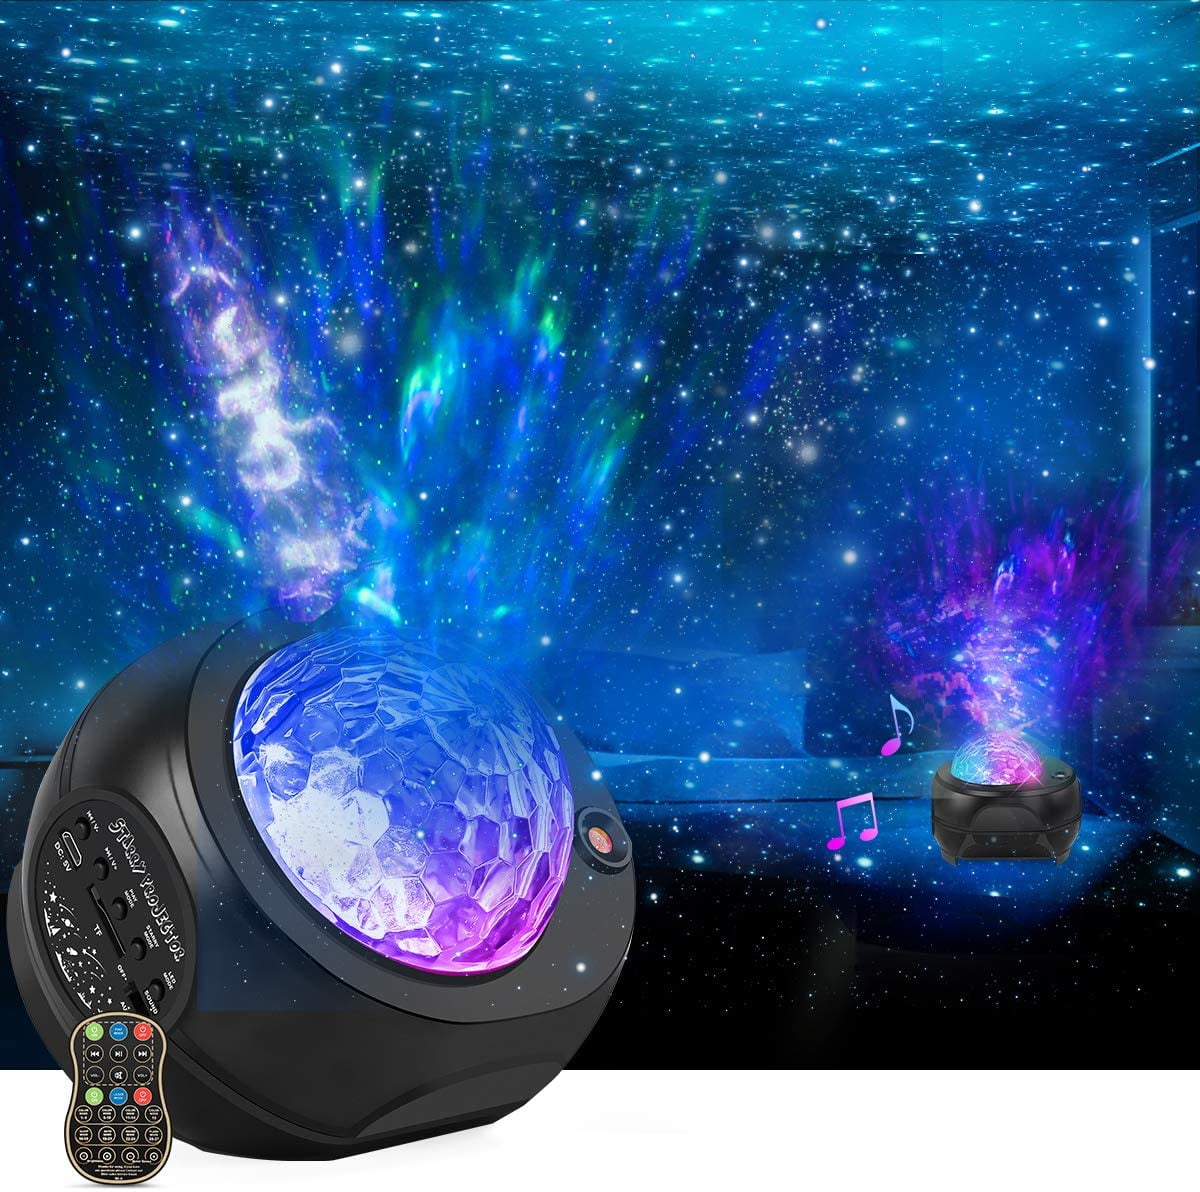 Eimeli Star Projector Night Lights, 3 in 1 Galaxy Projector Light, Sky Nebula/Moving Ocean Wave, Gift for Kids Adults for Bedroom/Party with Hi-Fi